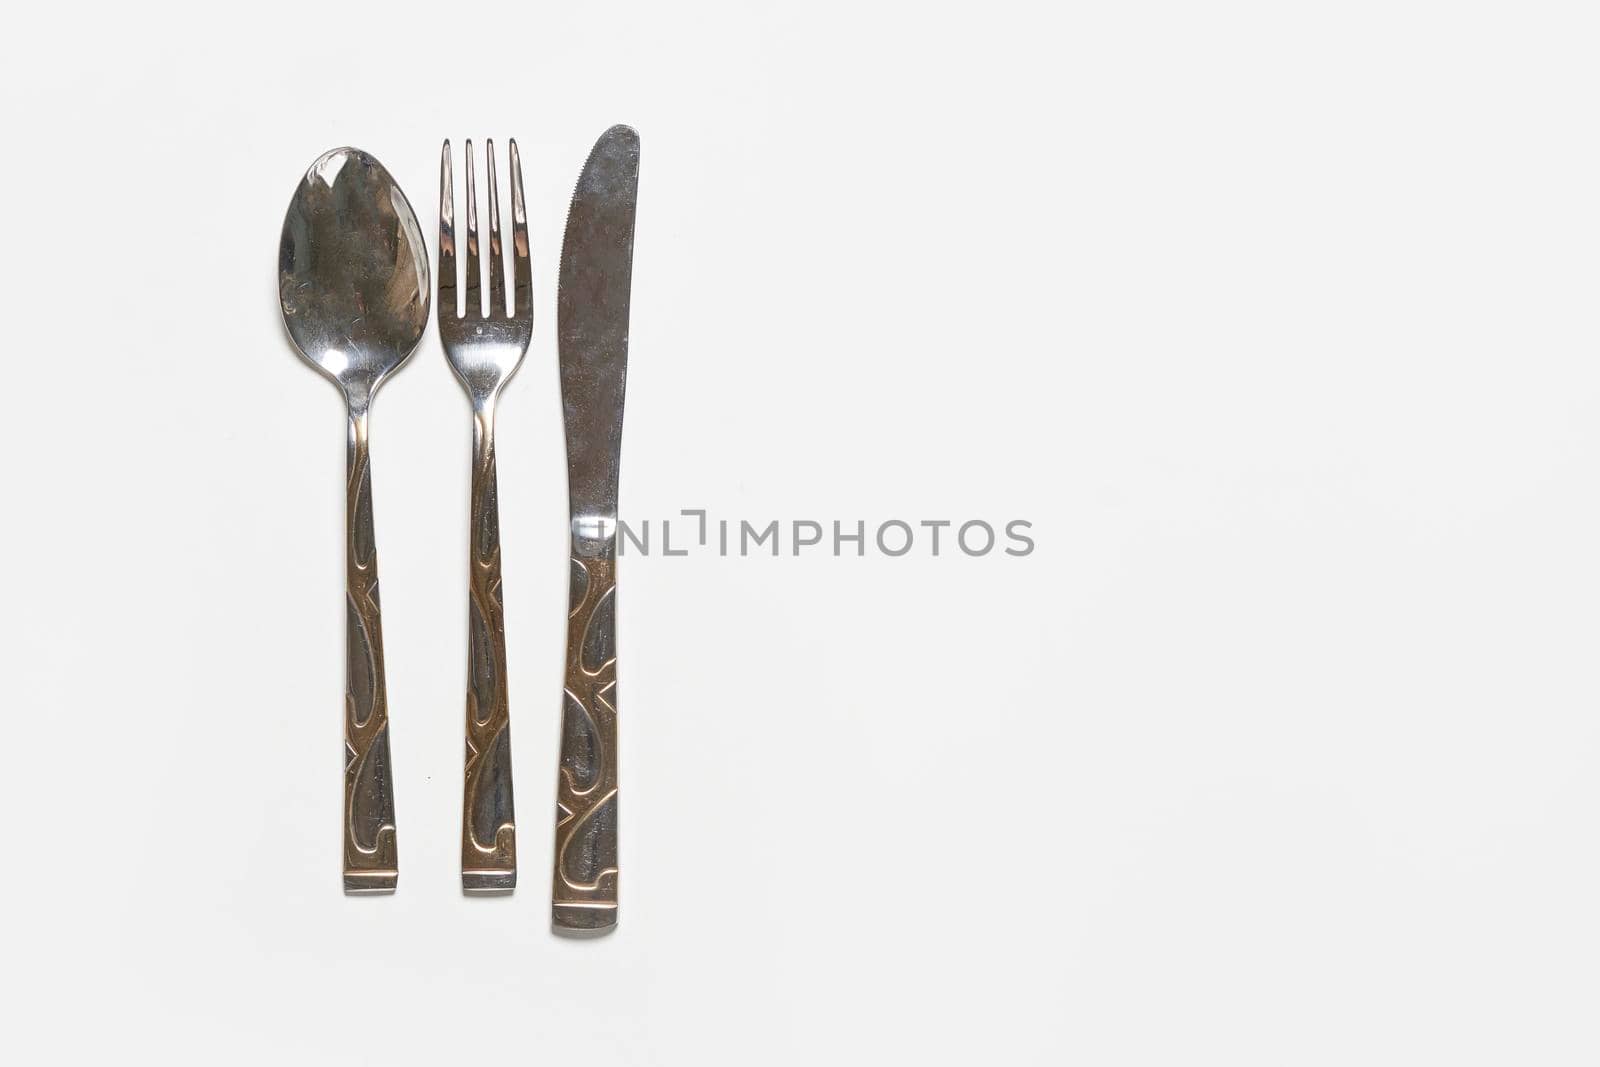 Restaurant eating items - Fork, spoon and knife on white background